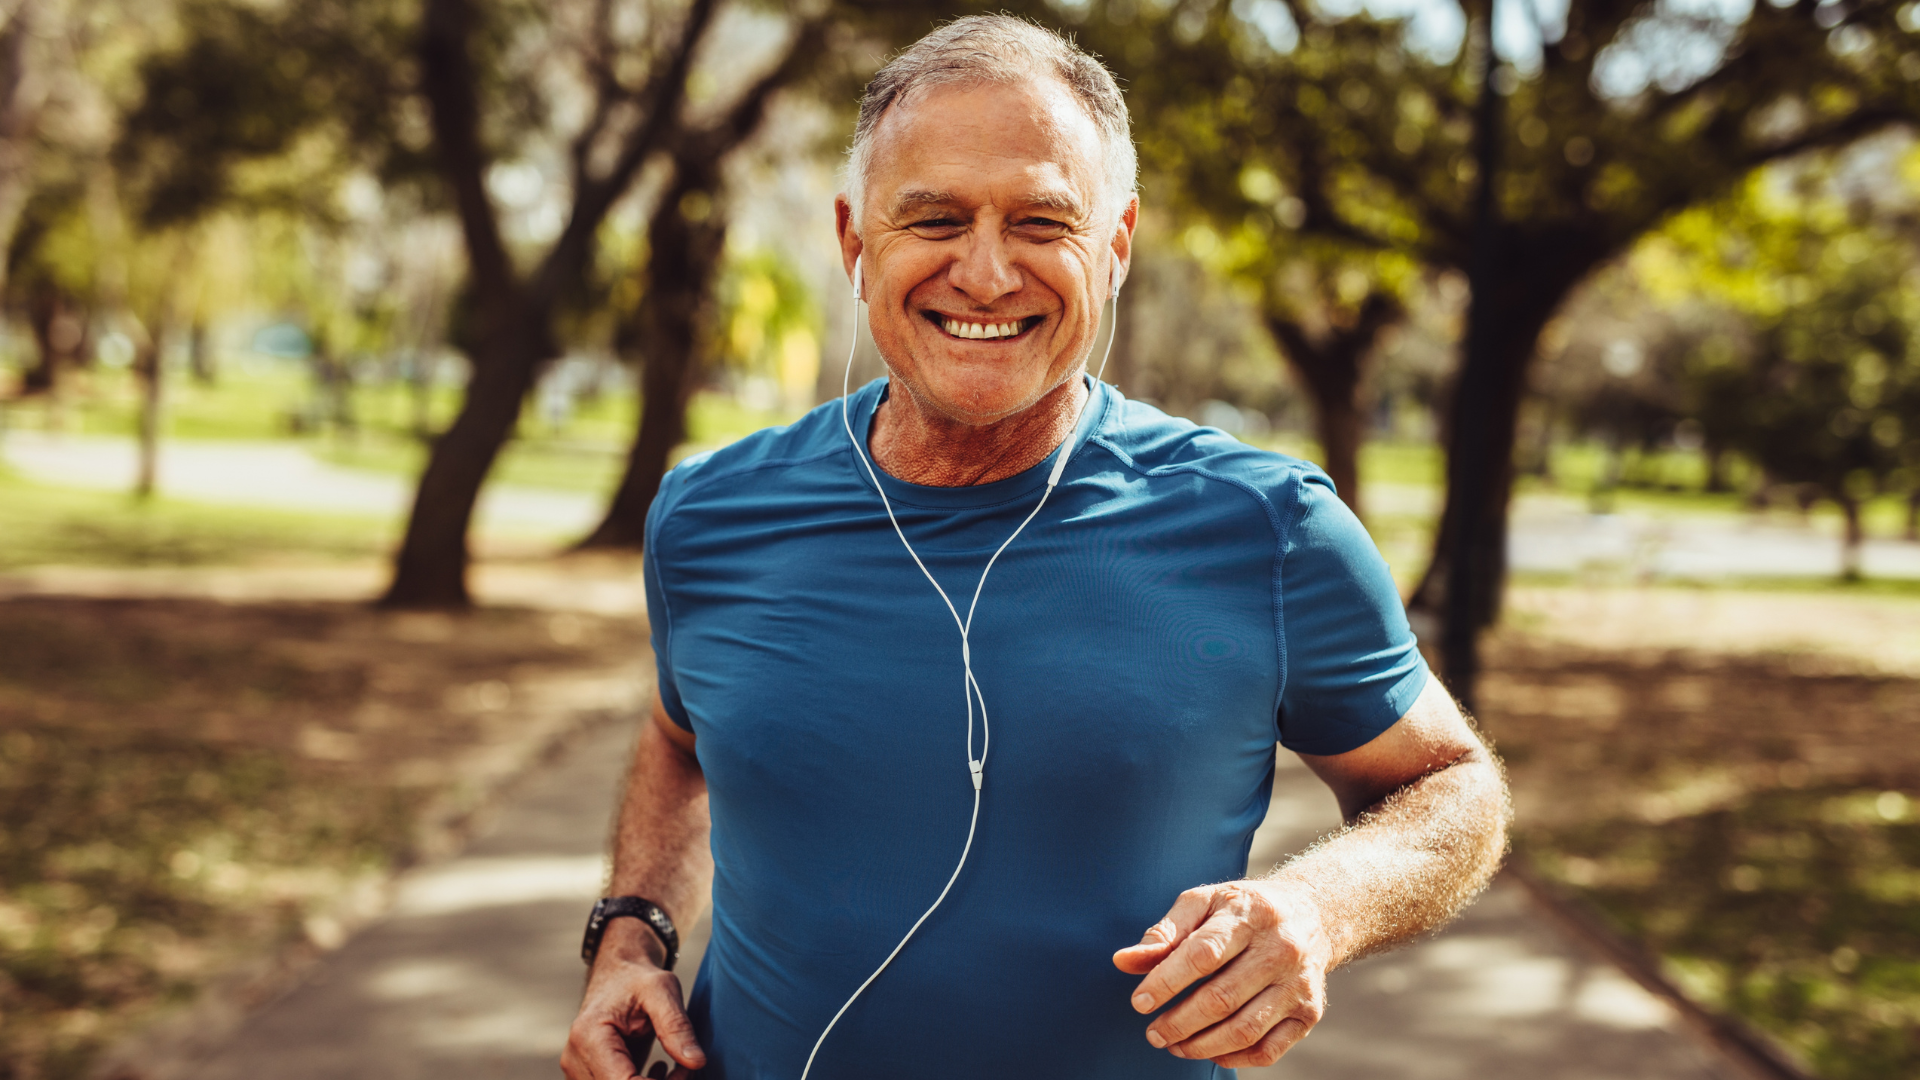 An image of a happy elderly man going for a jog